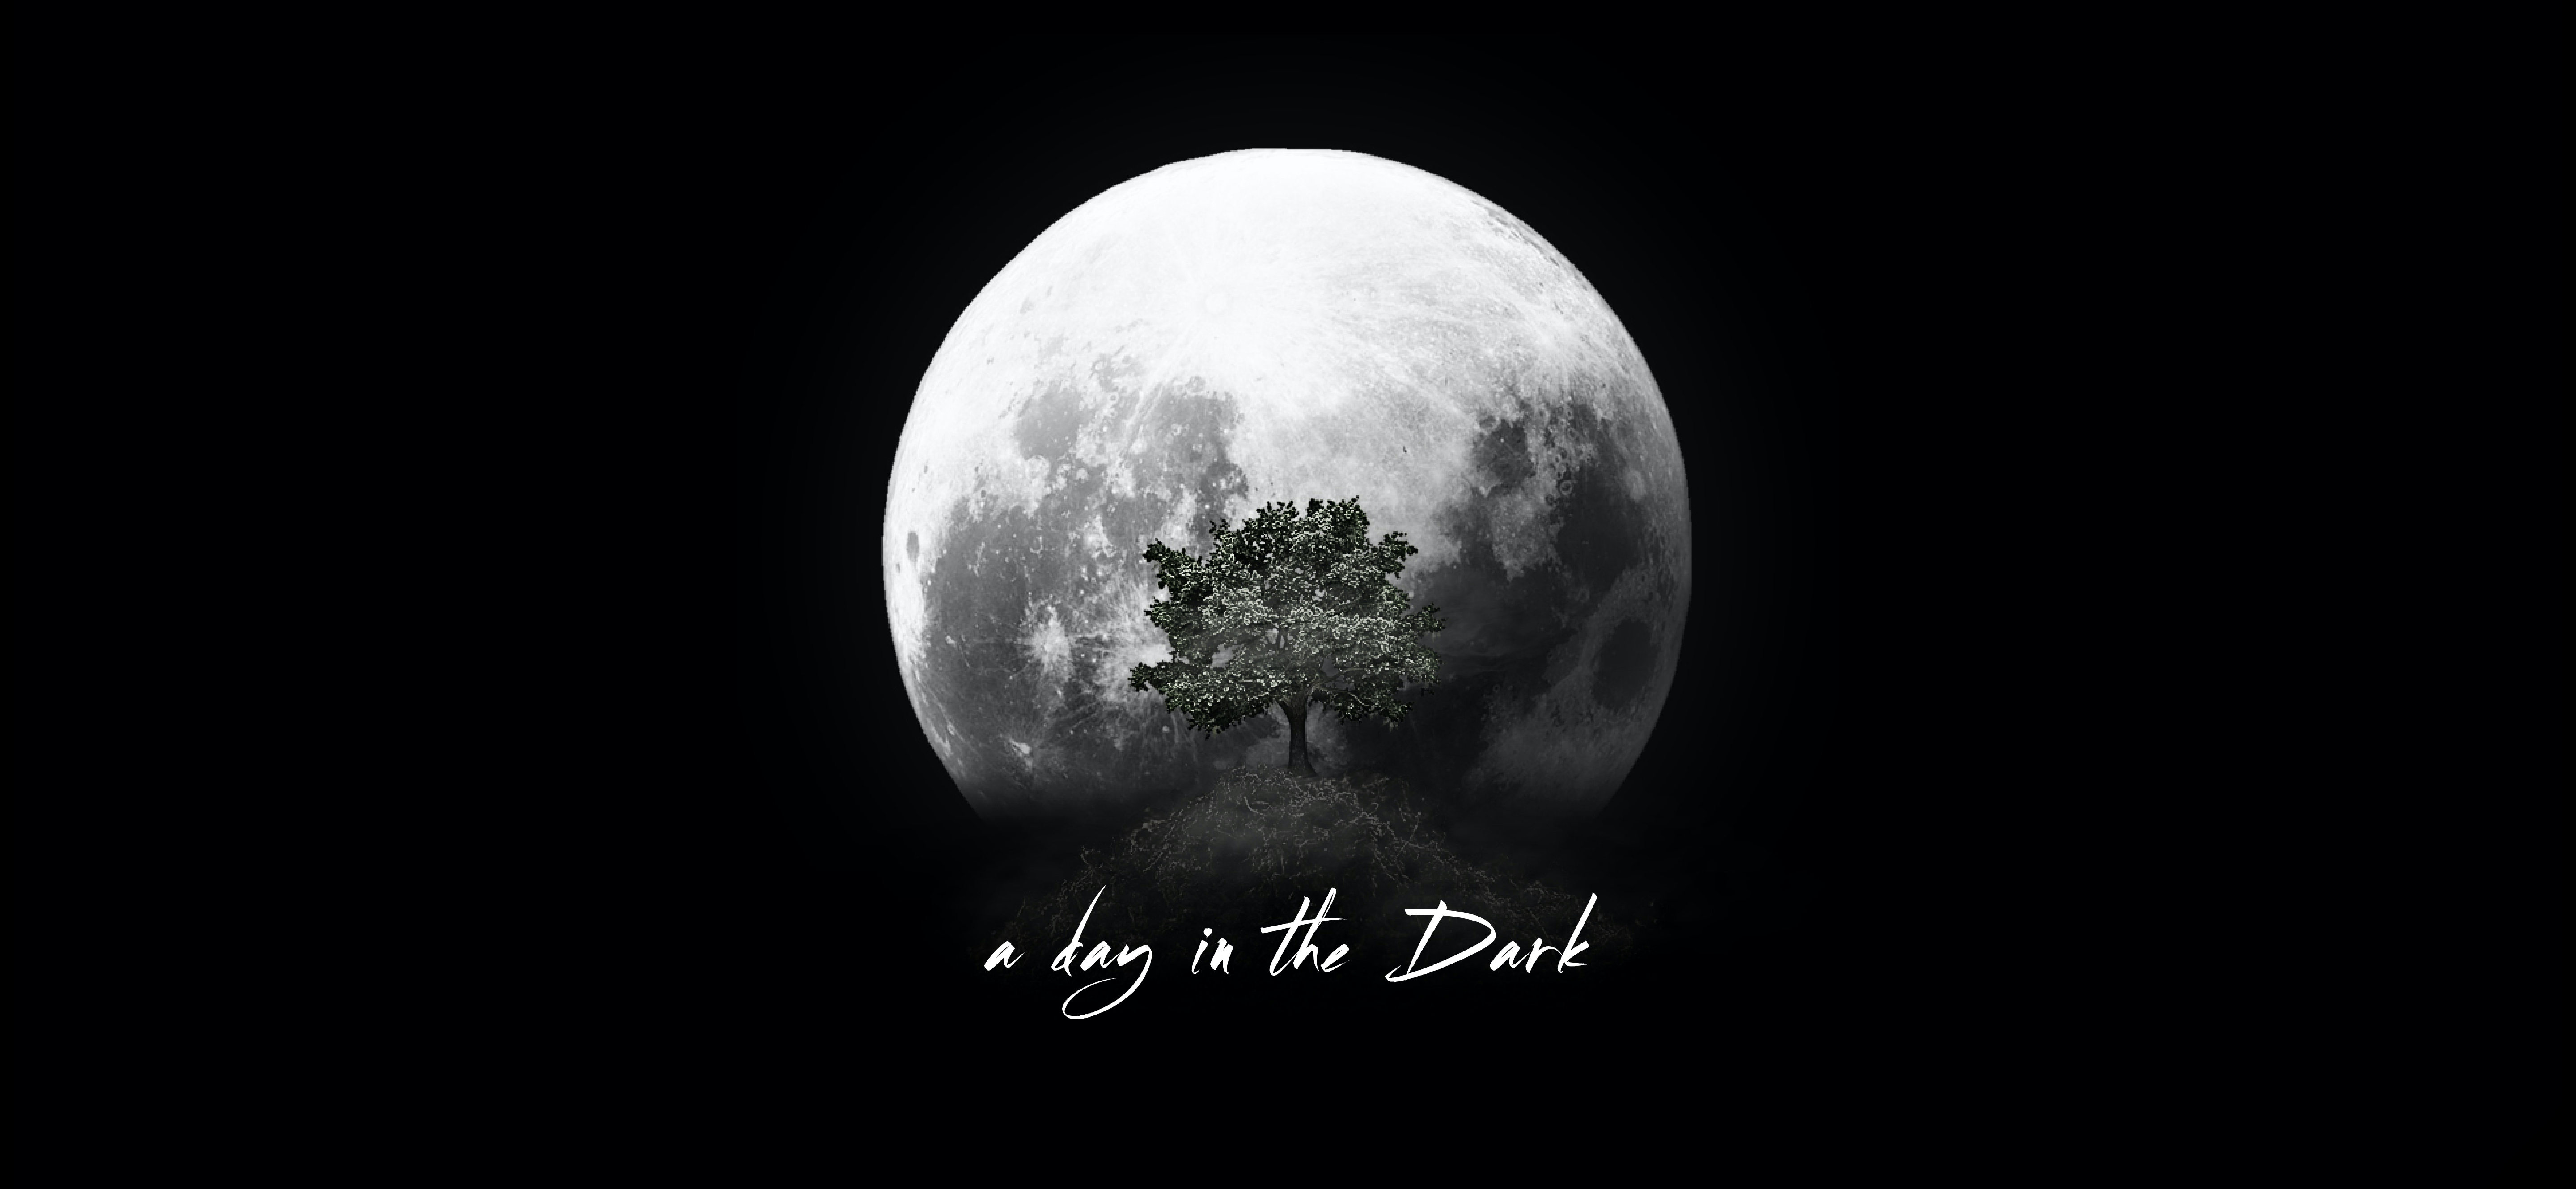 Day in the dark ux works by Moera Creative